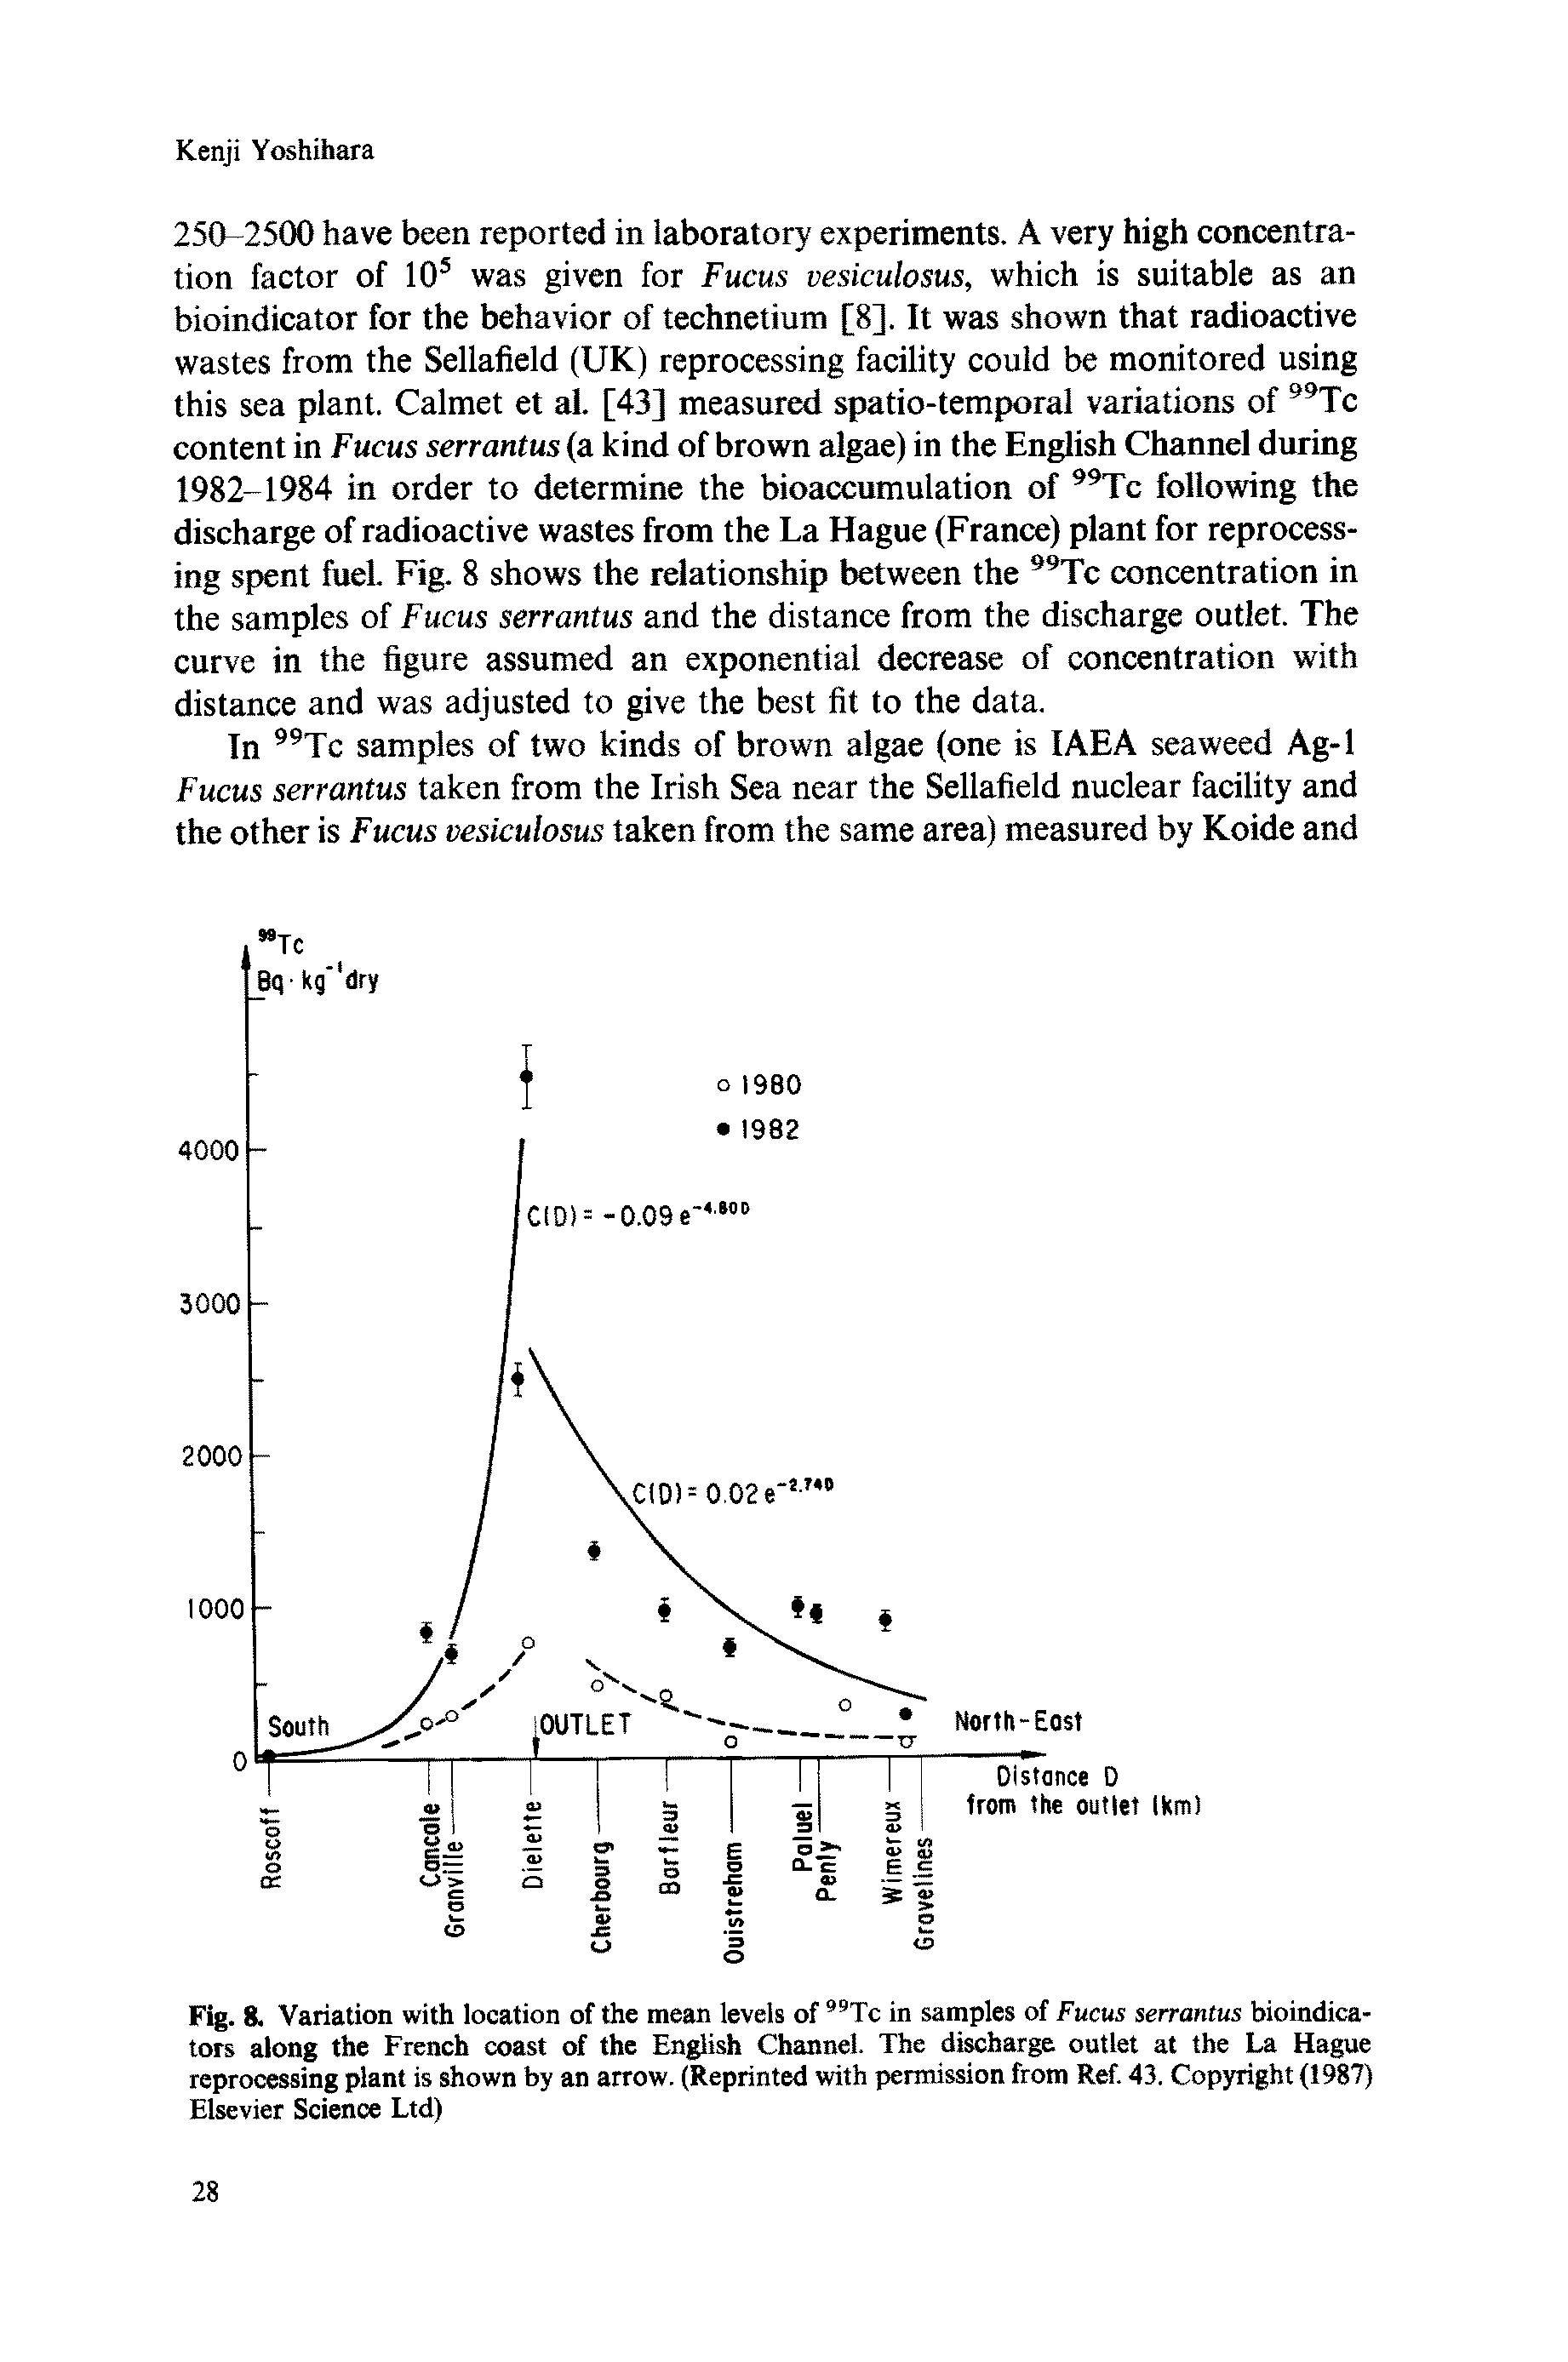 Fig. 8. Variation with location of the mean levels of "Tc in samples of Fucus serrantus bioindicators along the French coast of the English Channel. The discharge outlet at the La Hague reprocessing plant is shown by an arrow. (Reprinted with permission from Ref. 43. Copyright (1987) Elsevier Science Ltd)...